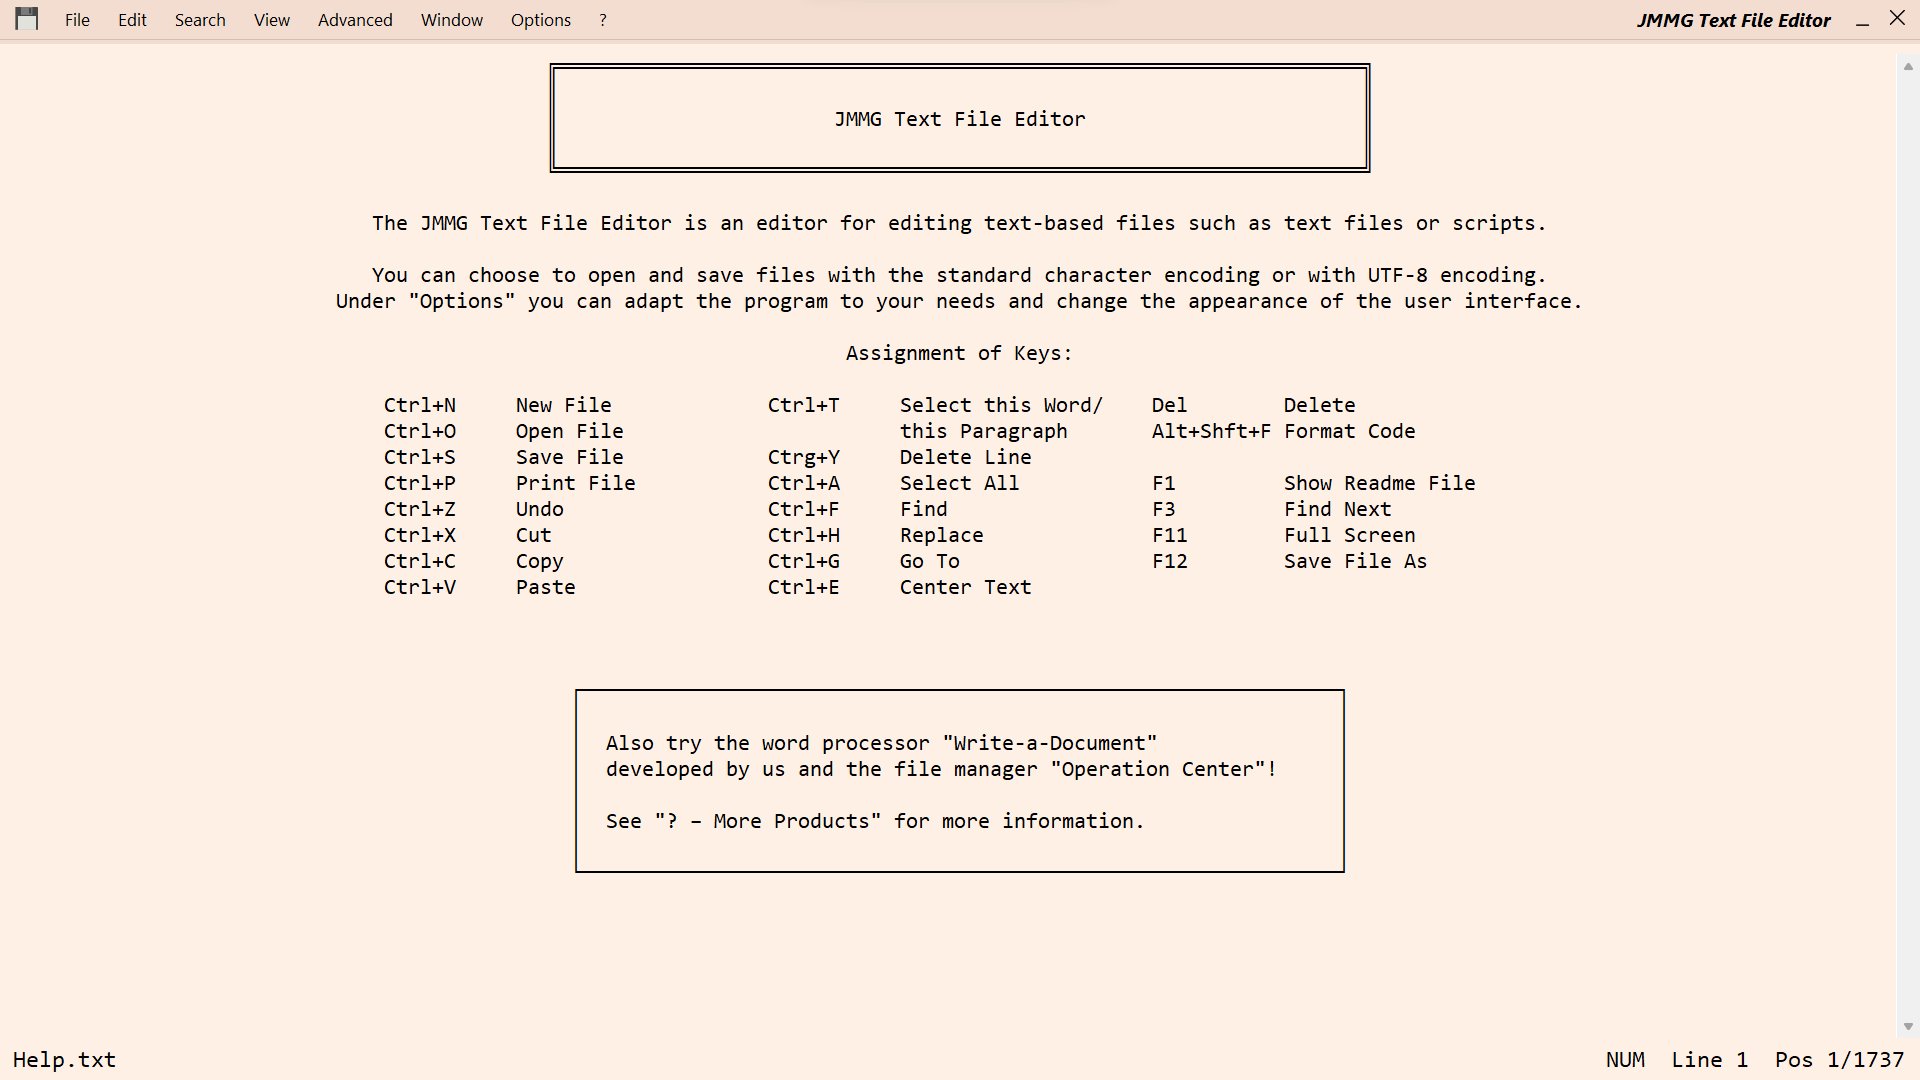 Text File Editor